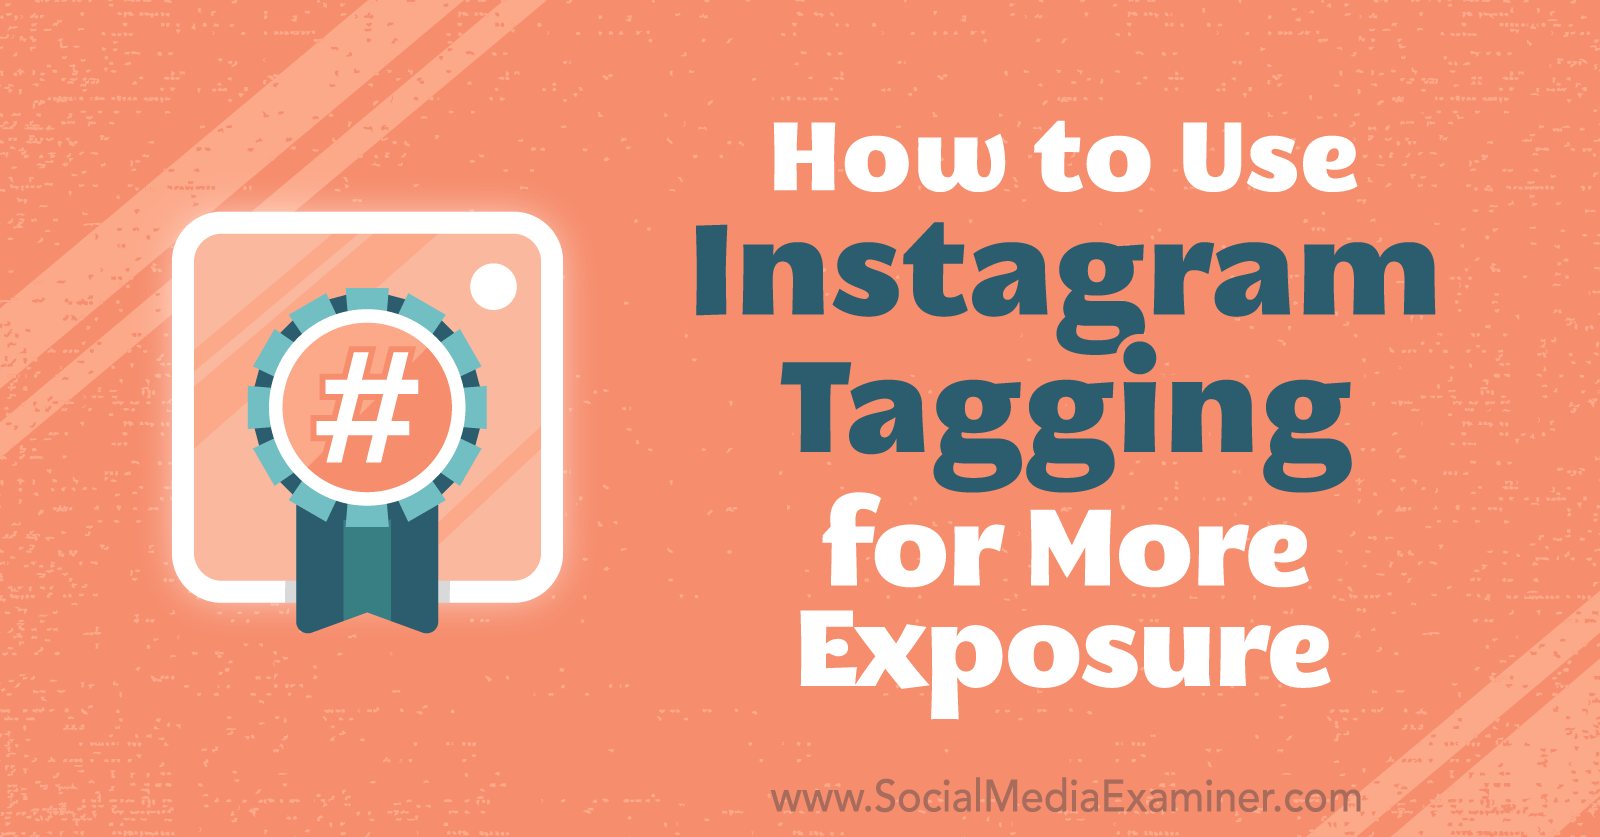 How to Use Instagram Tagging for More Exposure : Social Media Examiner